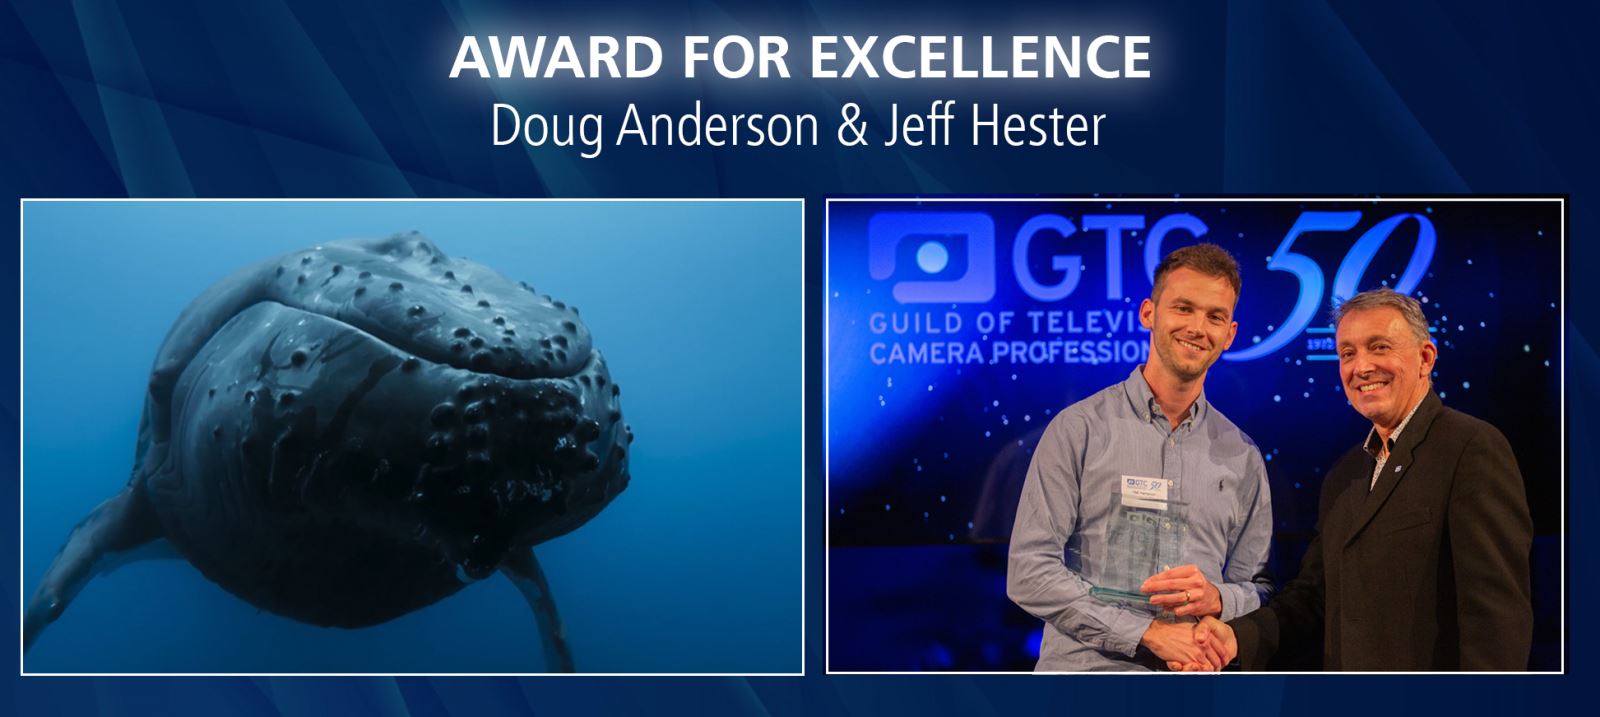 Award for Excellence - Doug Anderson and Jeff Hester